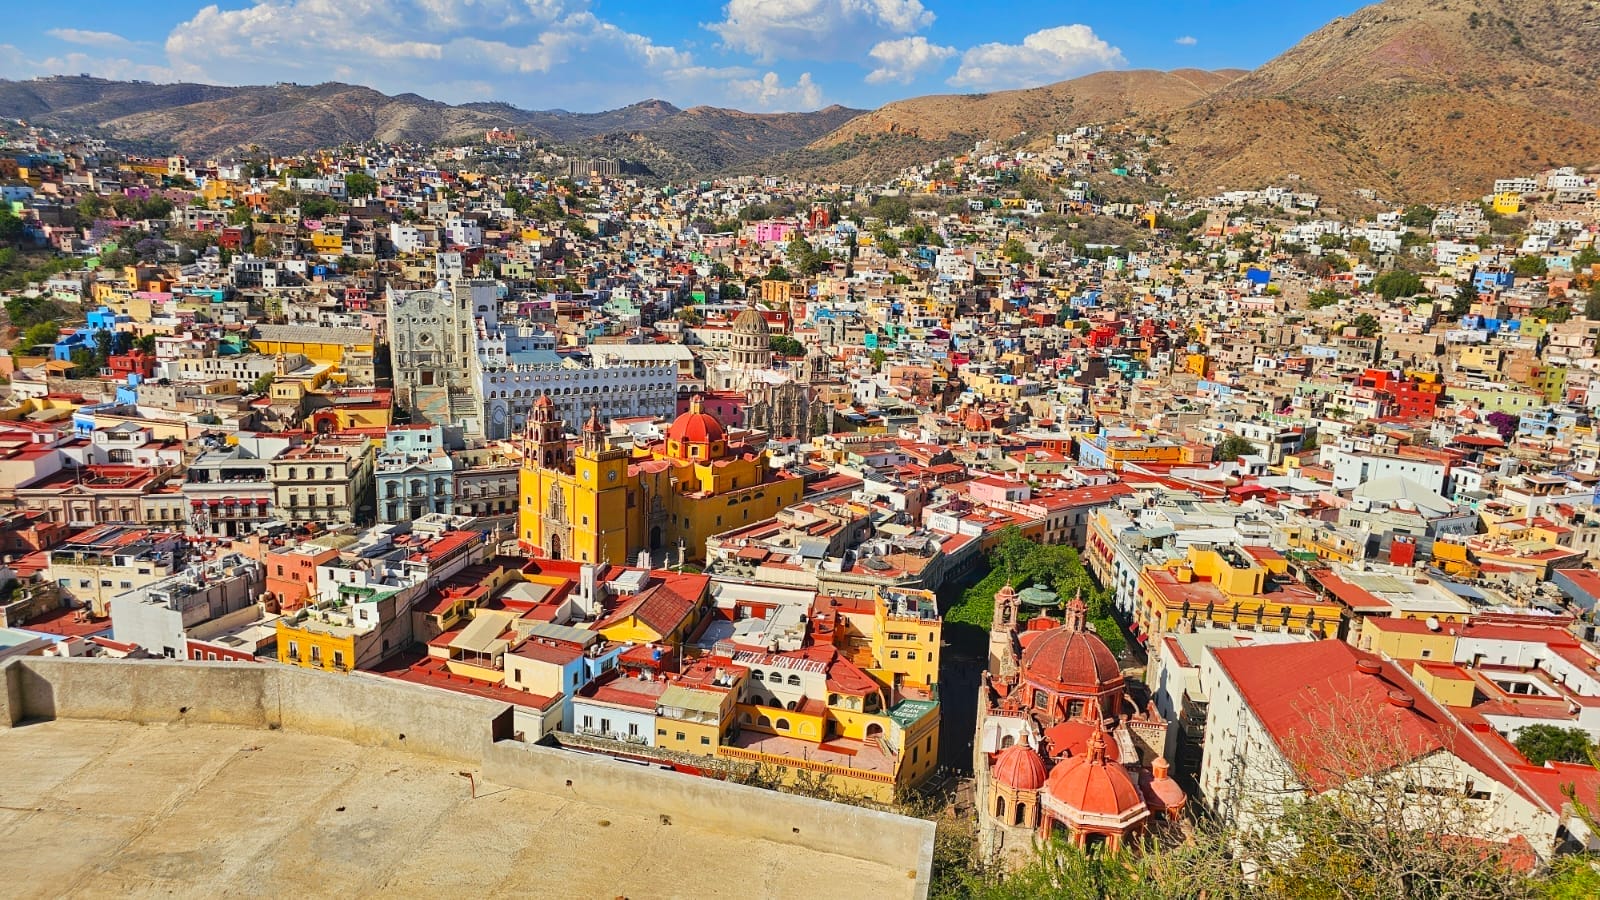 Guanajuato Itinerary - One day of top things to do